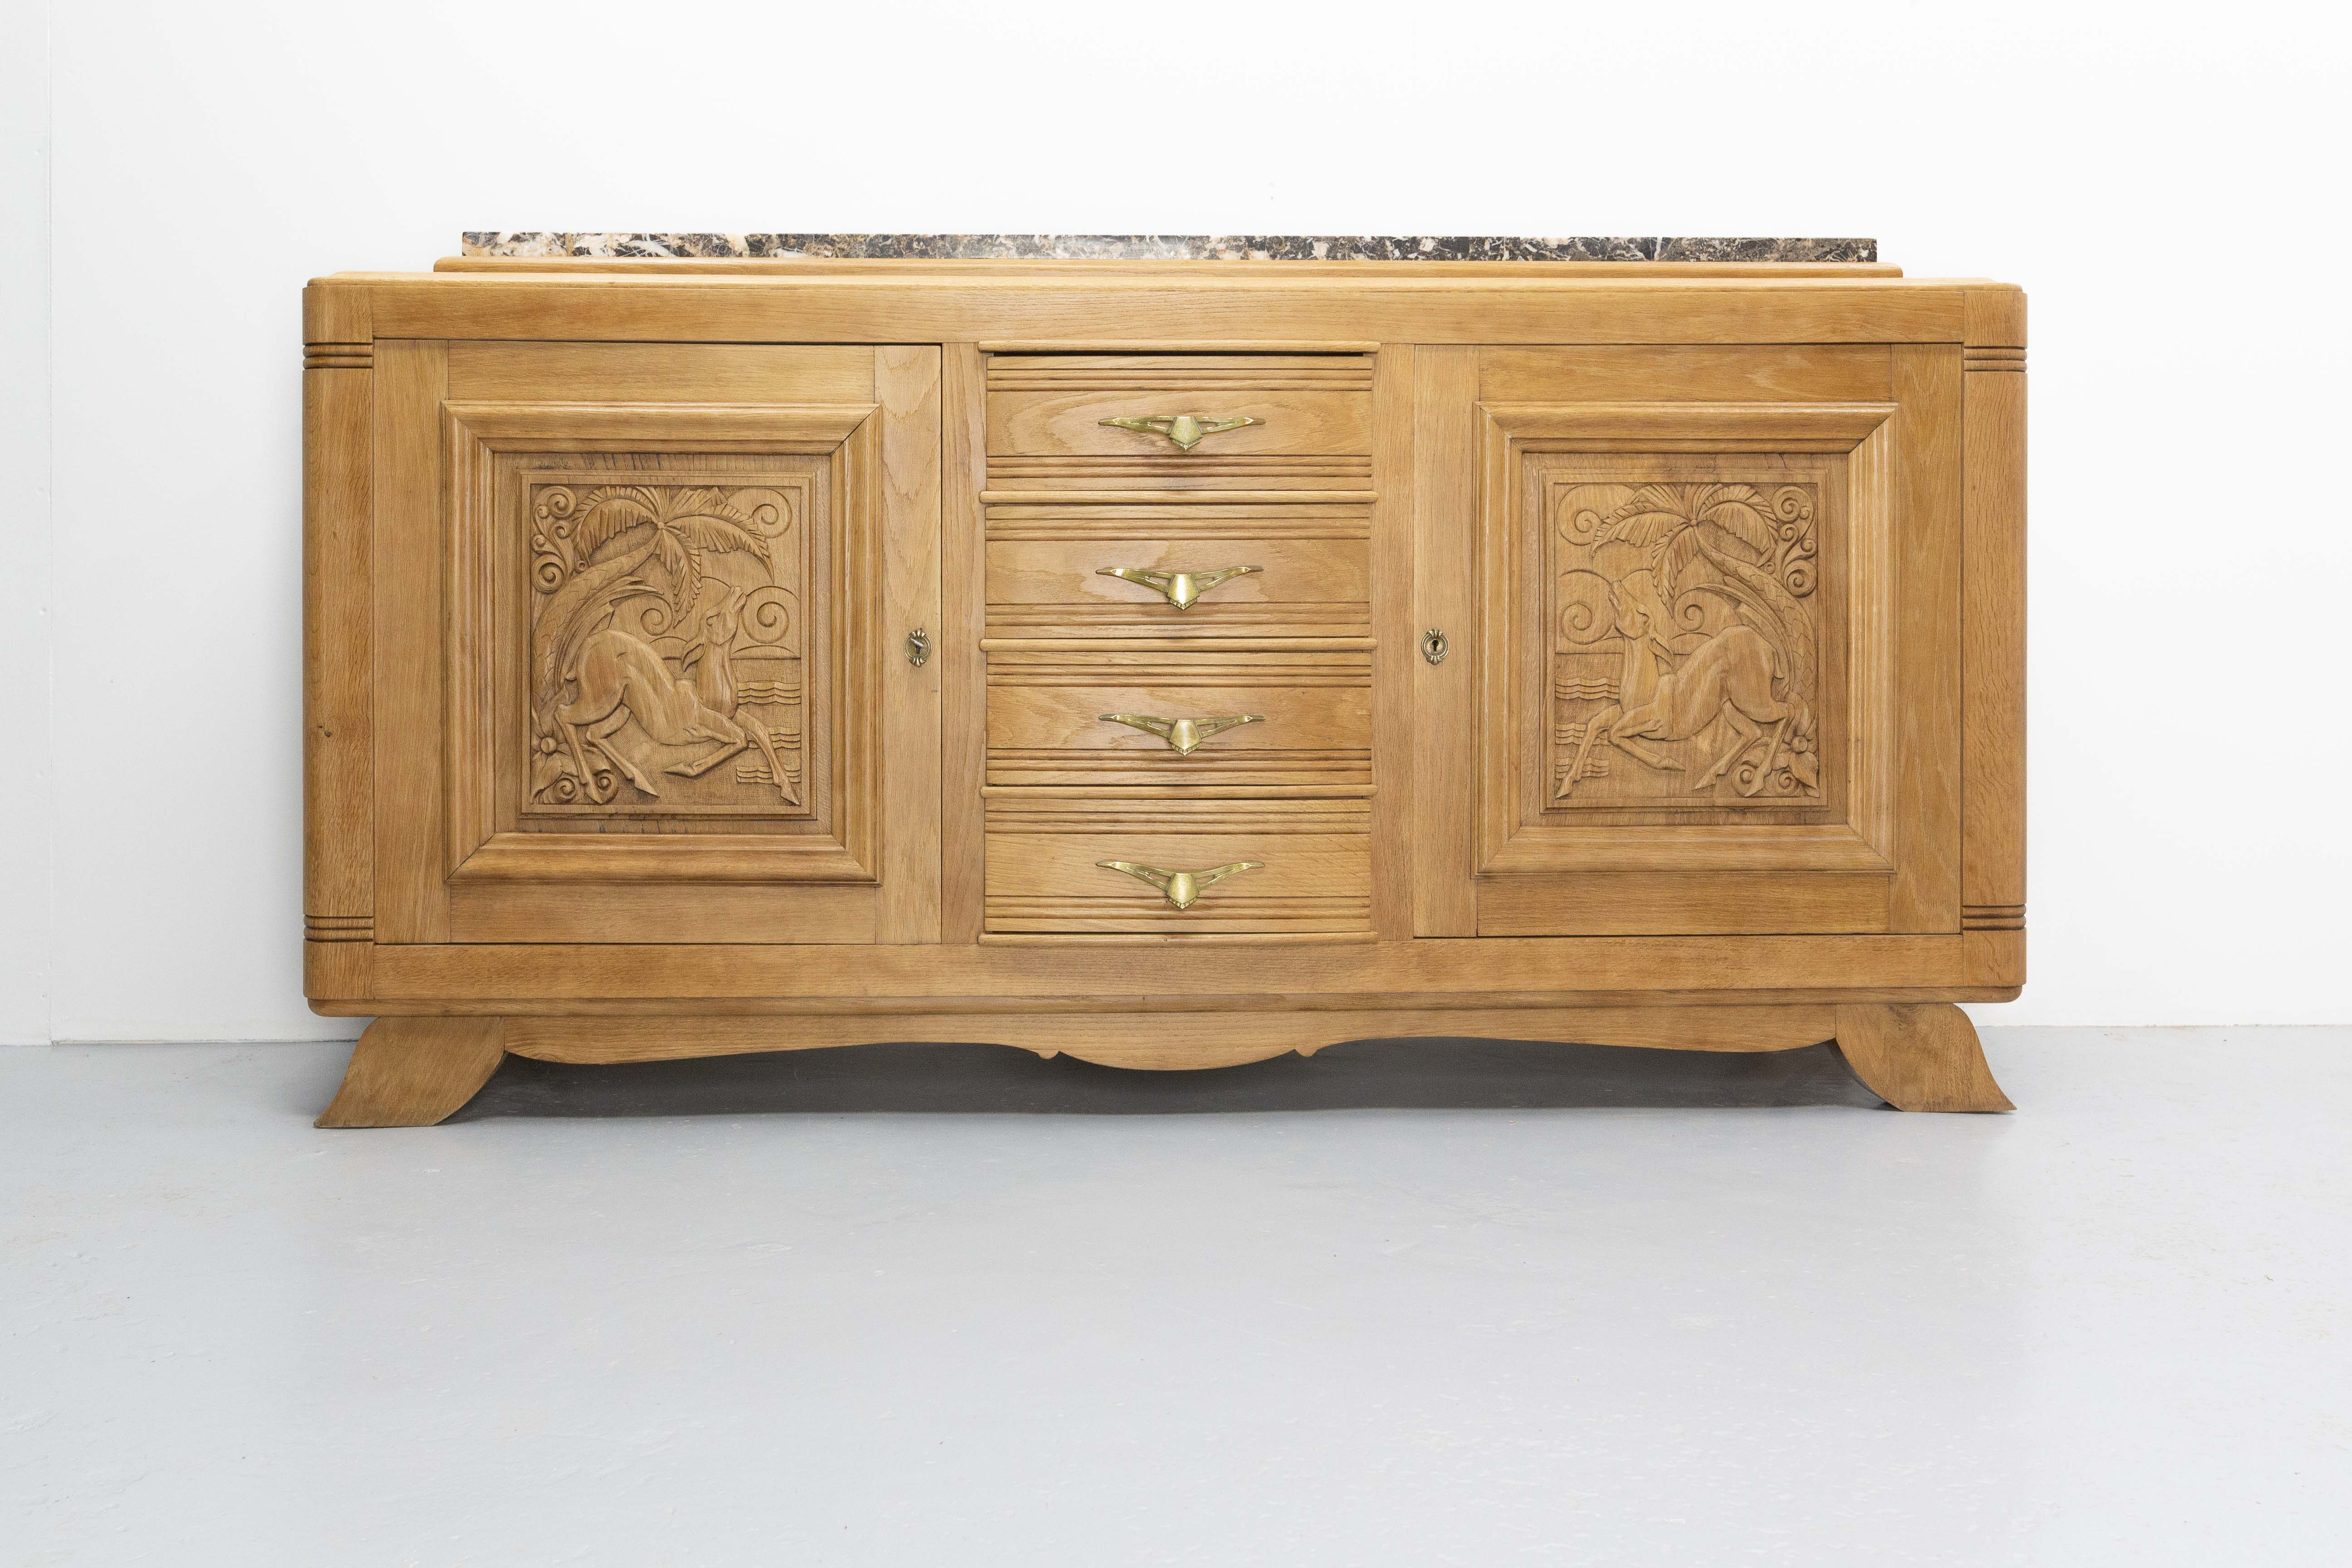 Massive Oak and Marble Top Antelopes Credenza Sideboard French Buffet, C. 1940